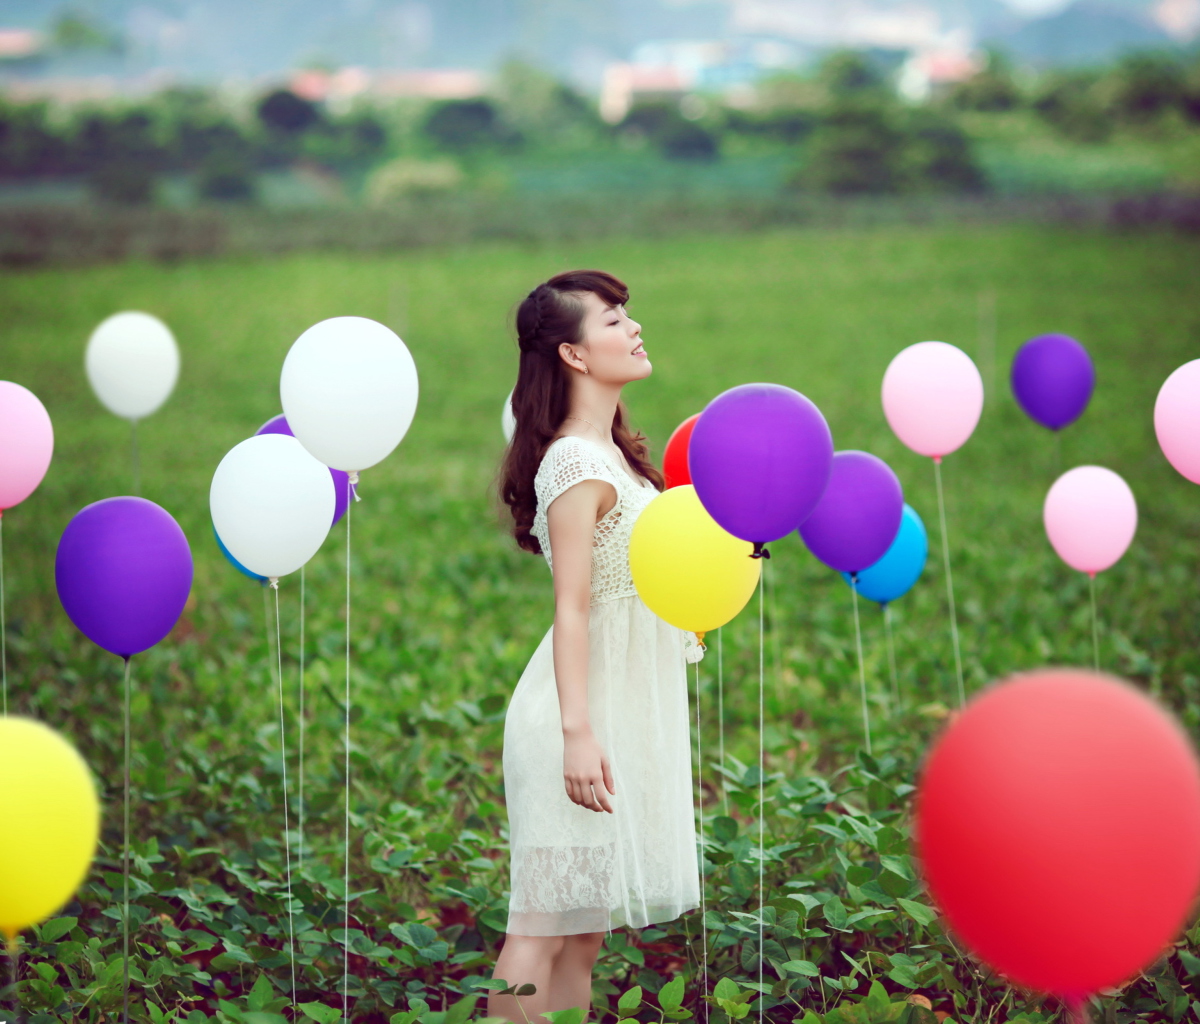 Girl And Colorful Balloons wallpaper 1200x1024